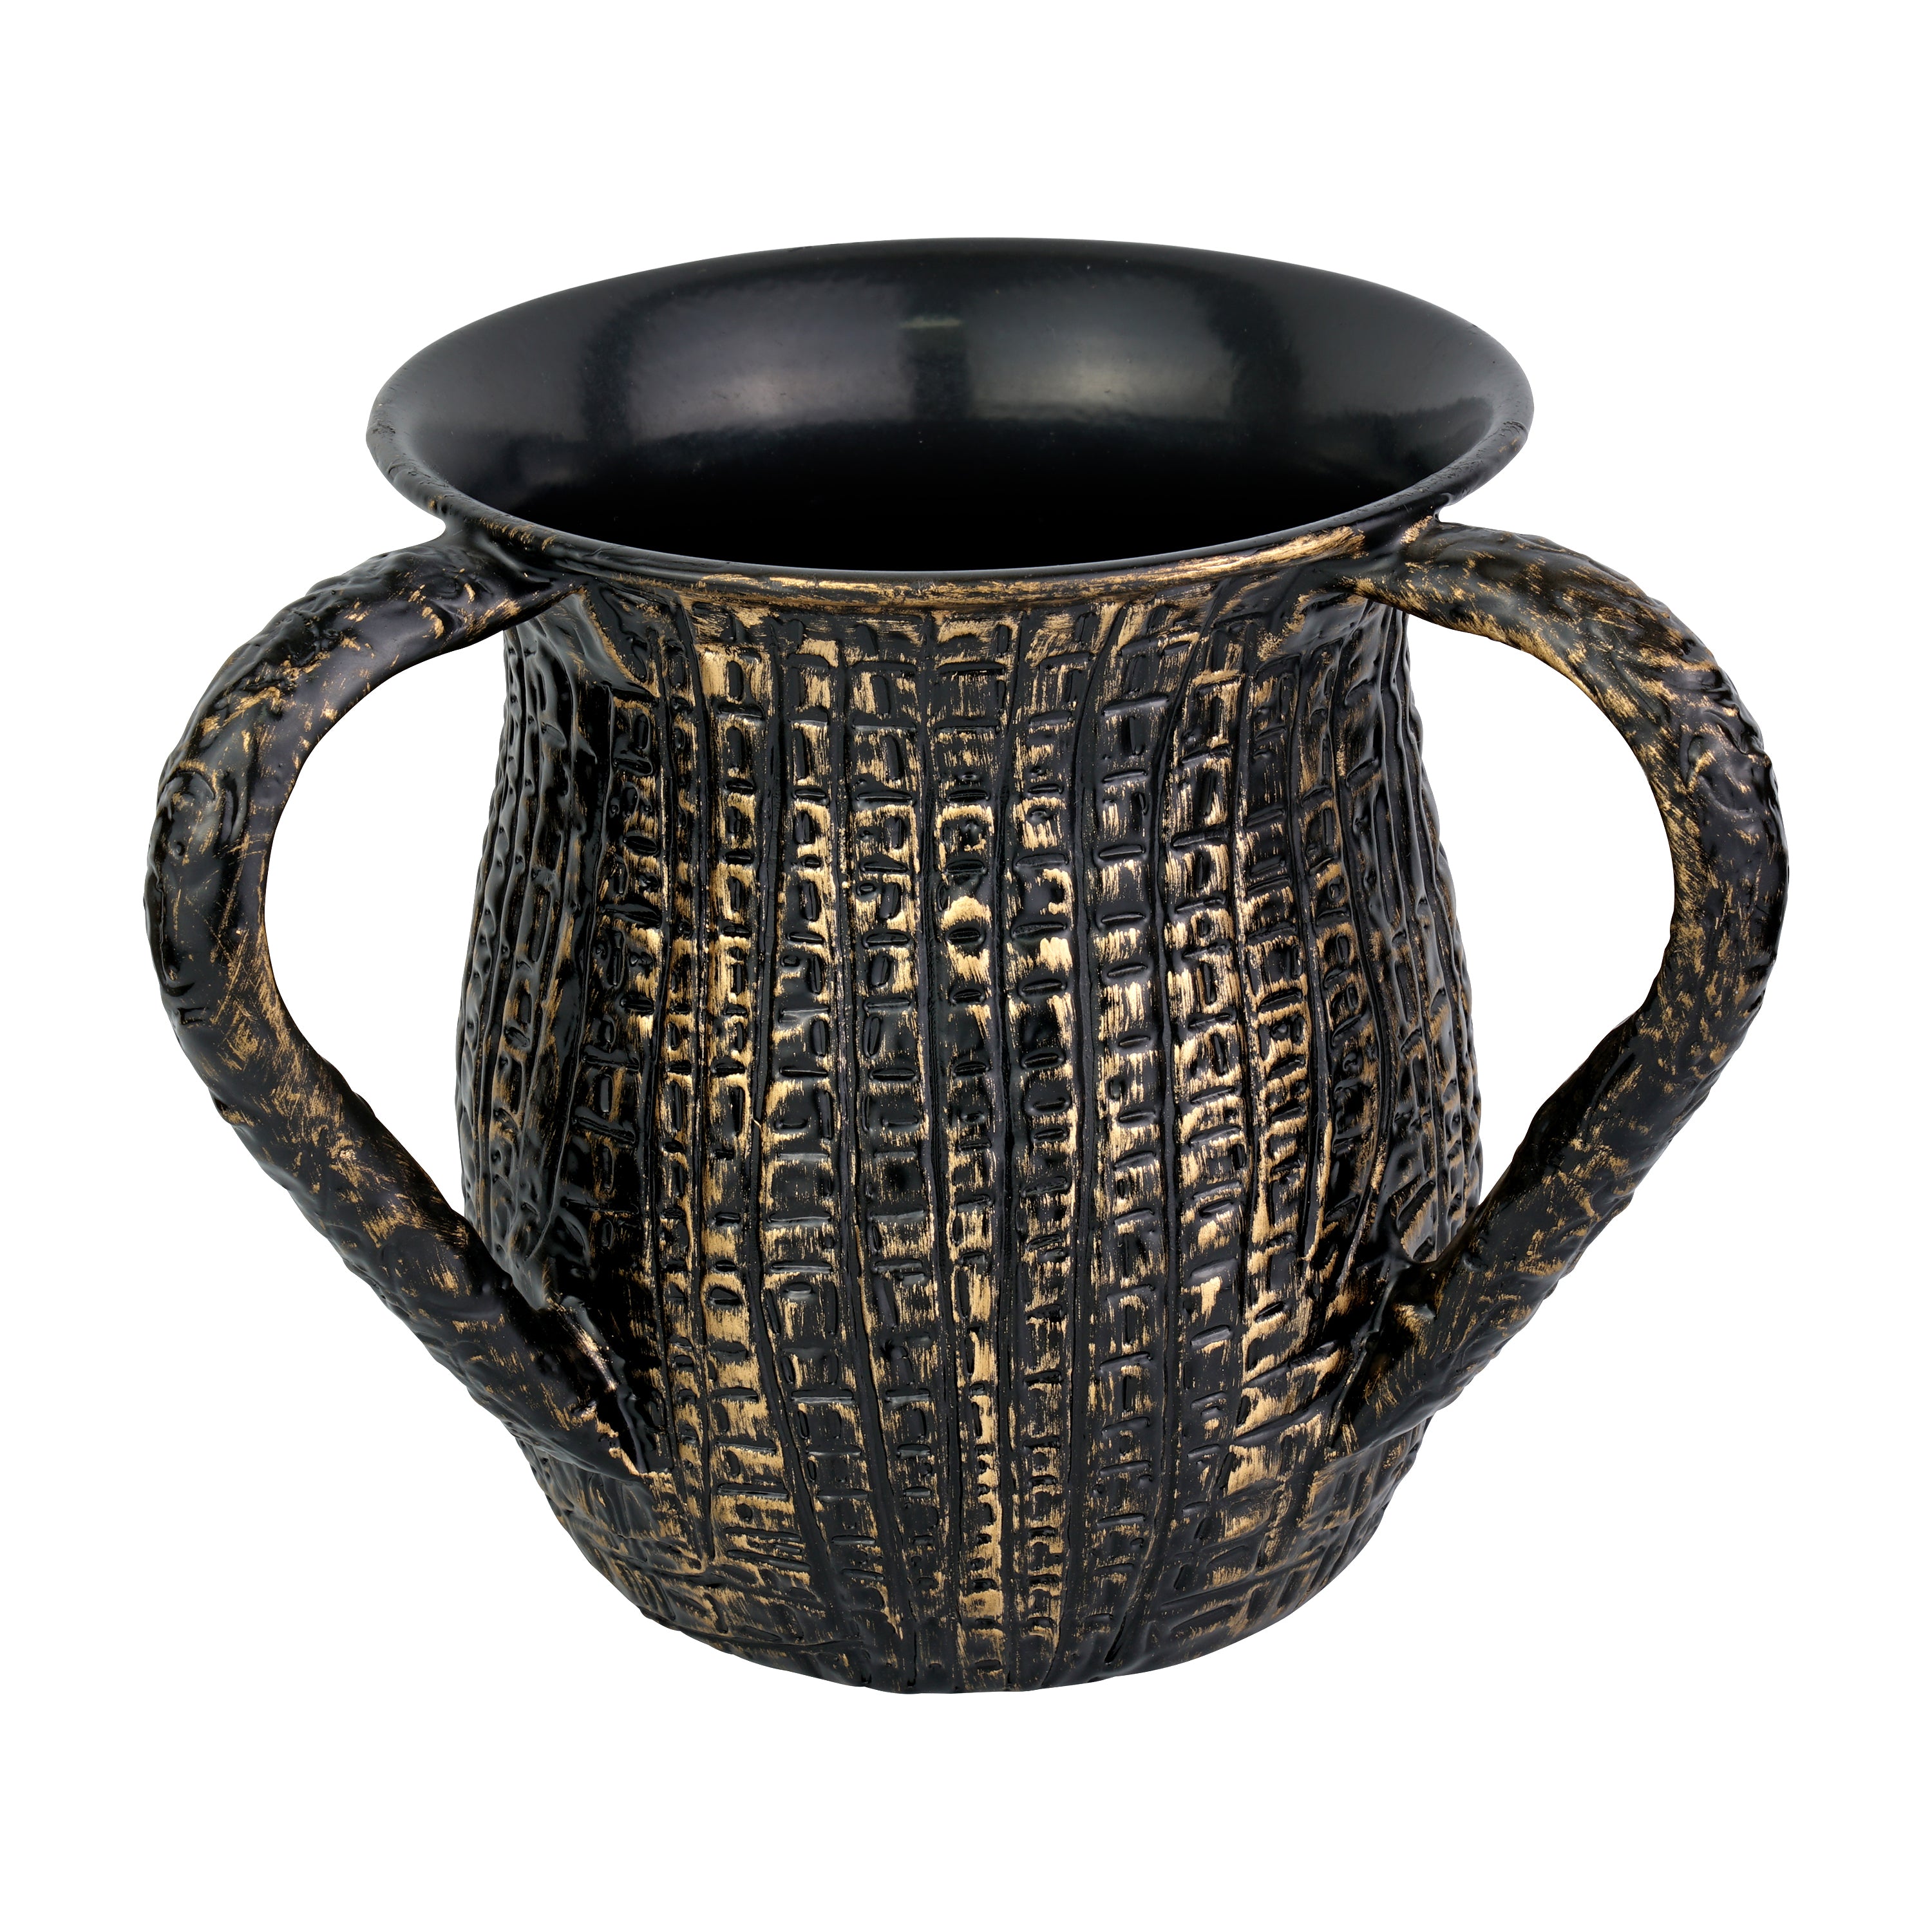 Stainless Steel Black Gold Spray Design Wash Cup